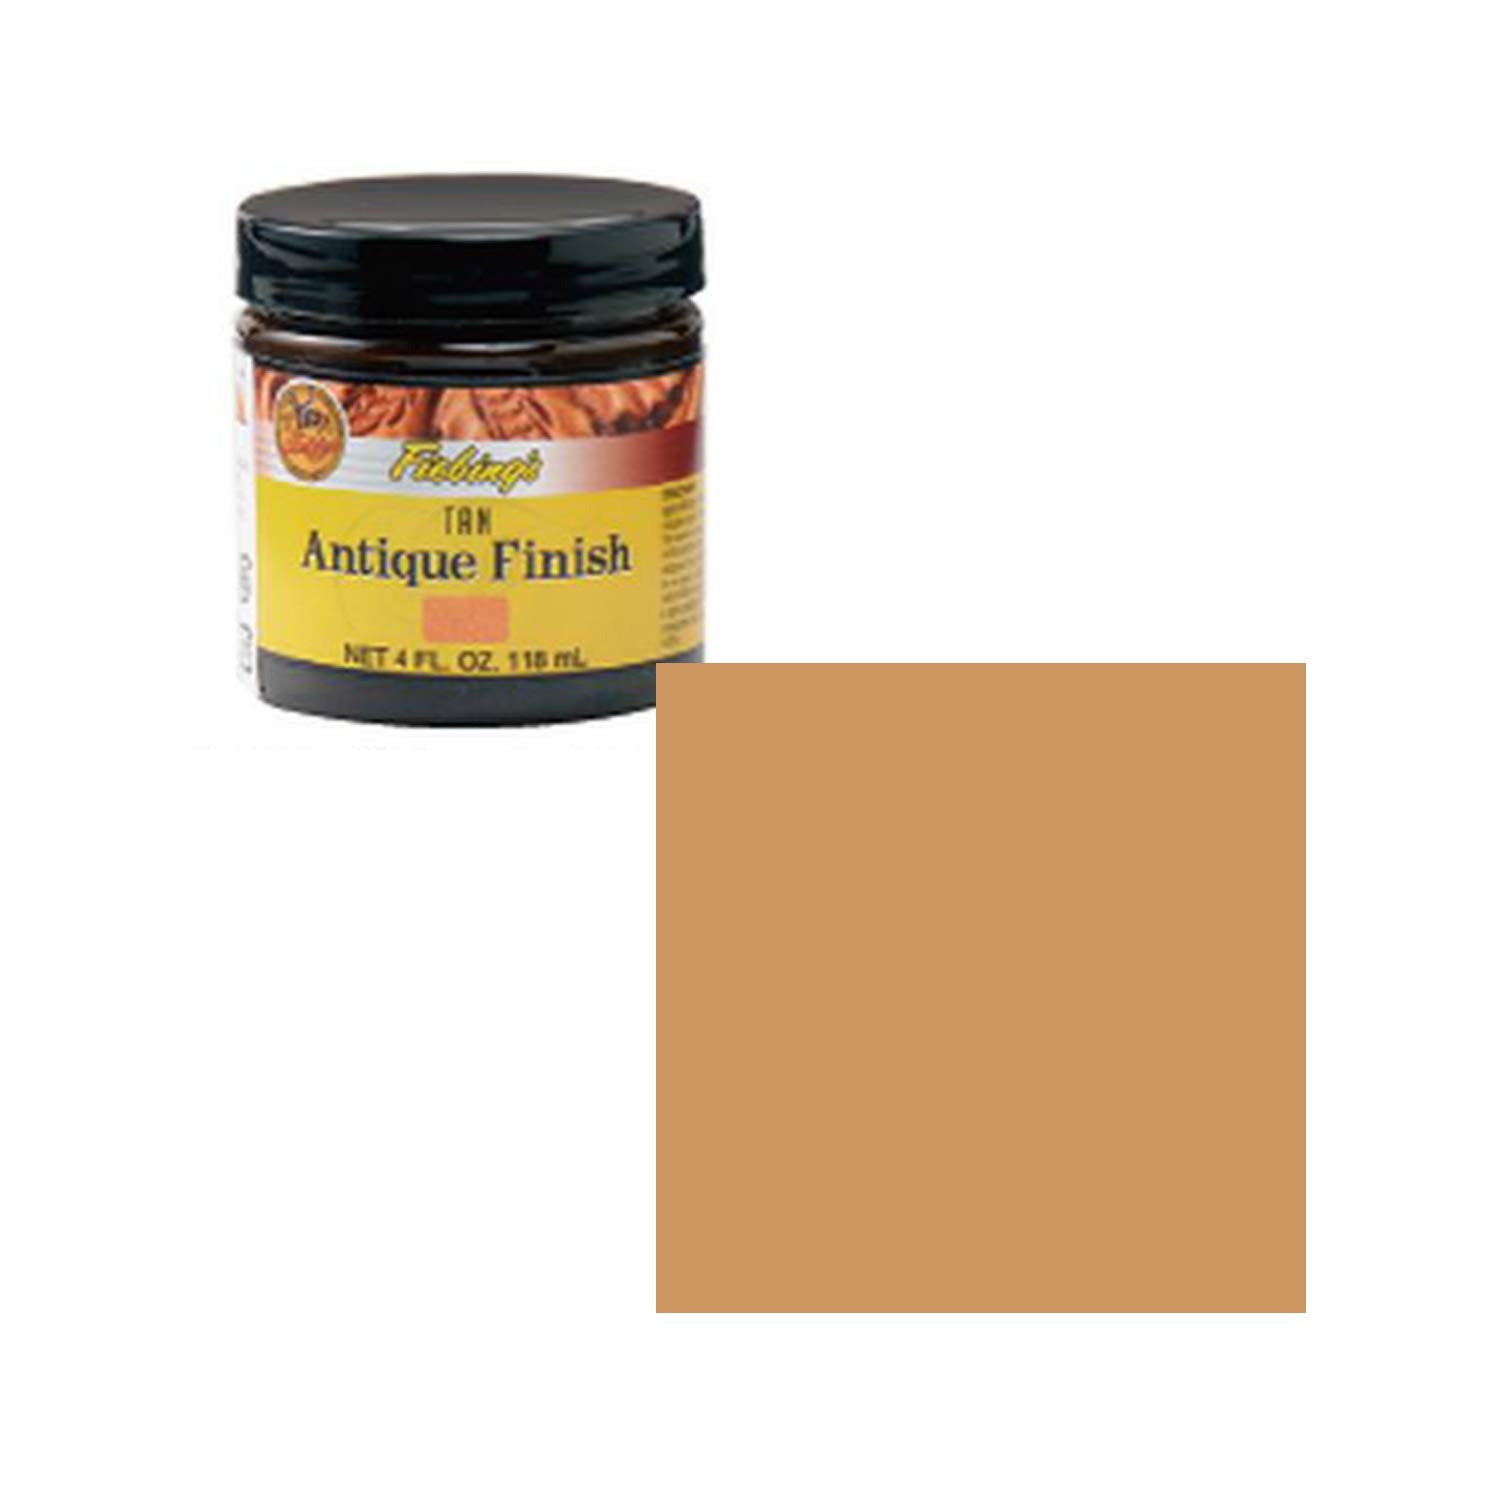 Fiebing's Antique Finish (4 oz) - Two-Toned Effect Emphasizes Leathercraft Embossing - Antiquing & Restoration Paste for Contrasted Accent Finish on Leather Boot, Shoe, Purse, Belt (Light Brown)